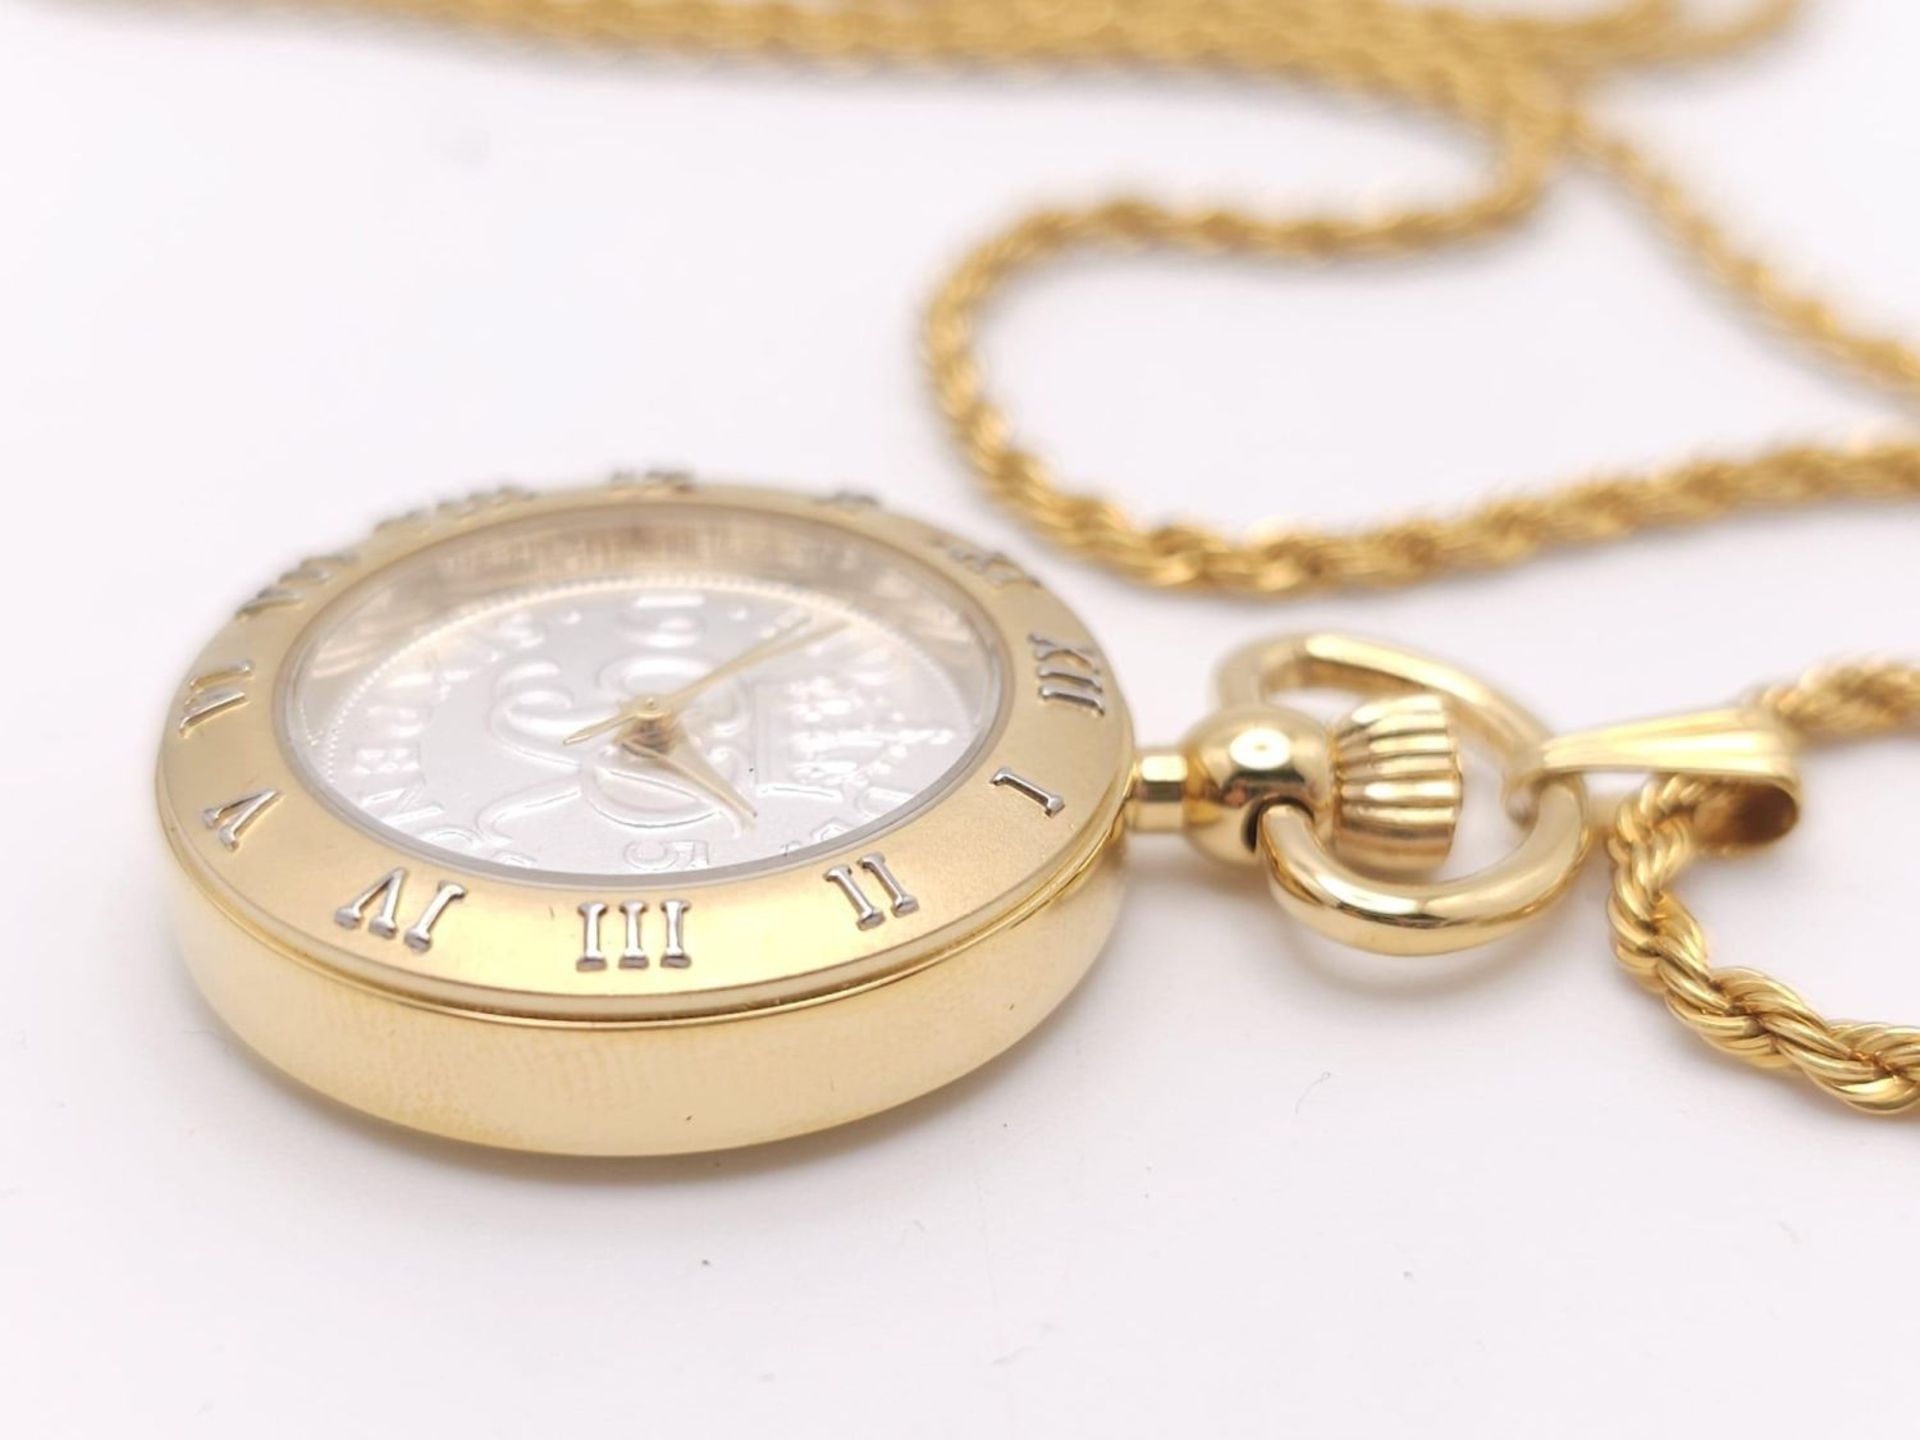 A BRAND NEW "COINWATCH" WITH 2 YEAR GUARANTEE . A PENDANT WATCH WITH A GENUINE COIN AS THE DIAL , - Bild 9 aus 18